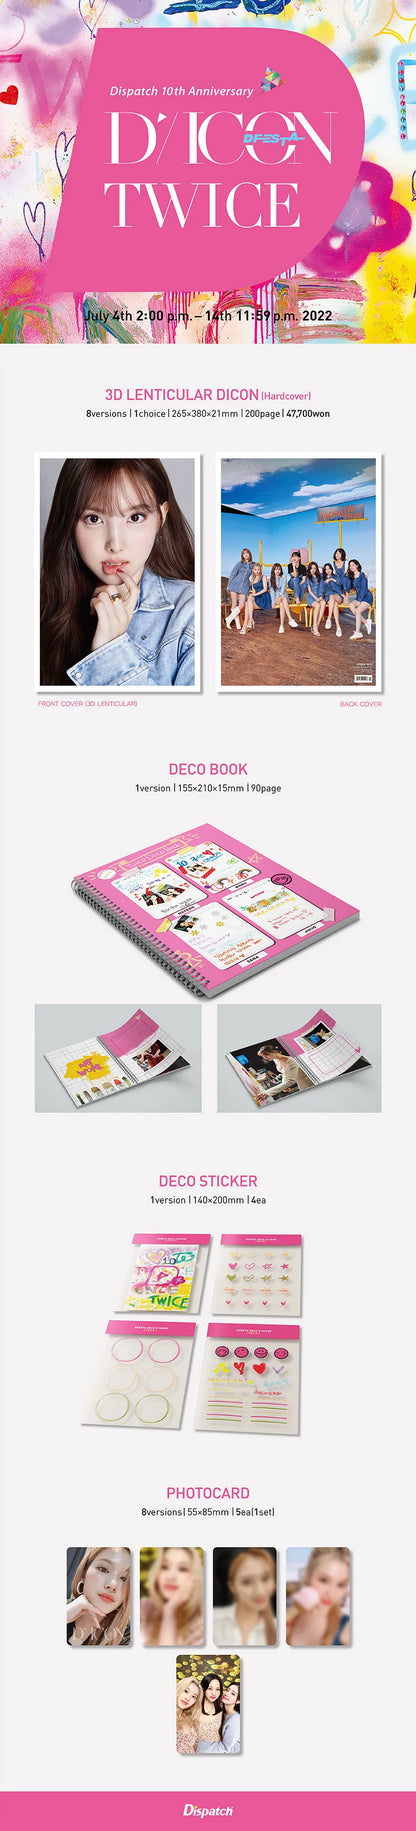 [IN-STORE PICKUP ONLY] TWICE - DICON D'FESTA 10th Anniversary Photobook